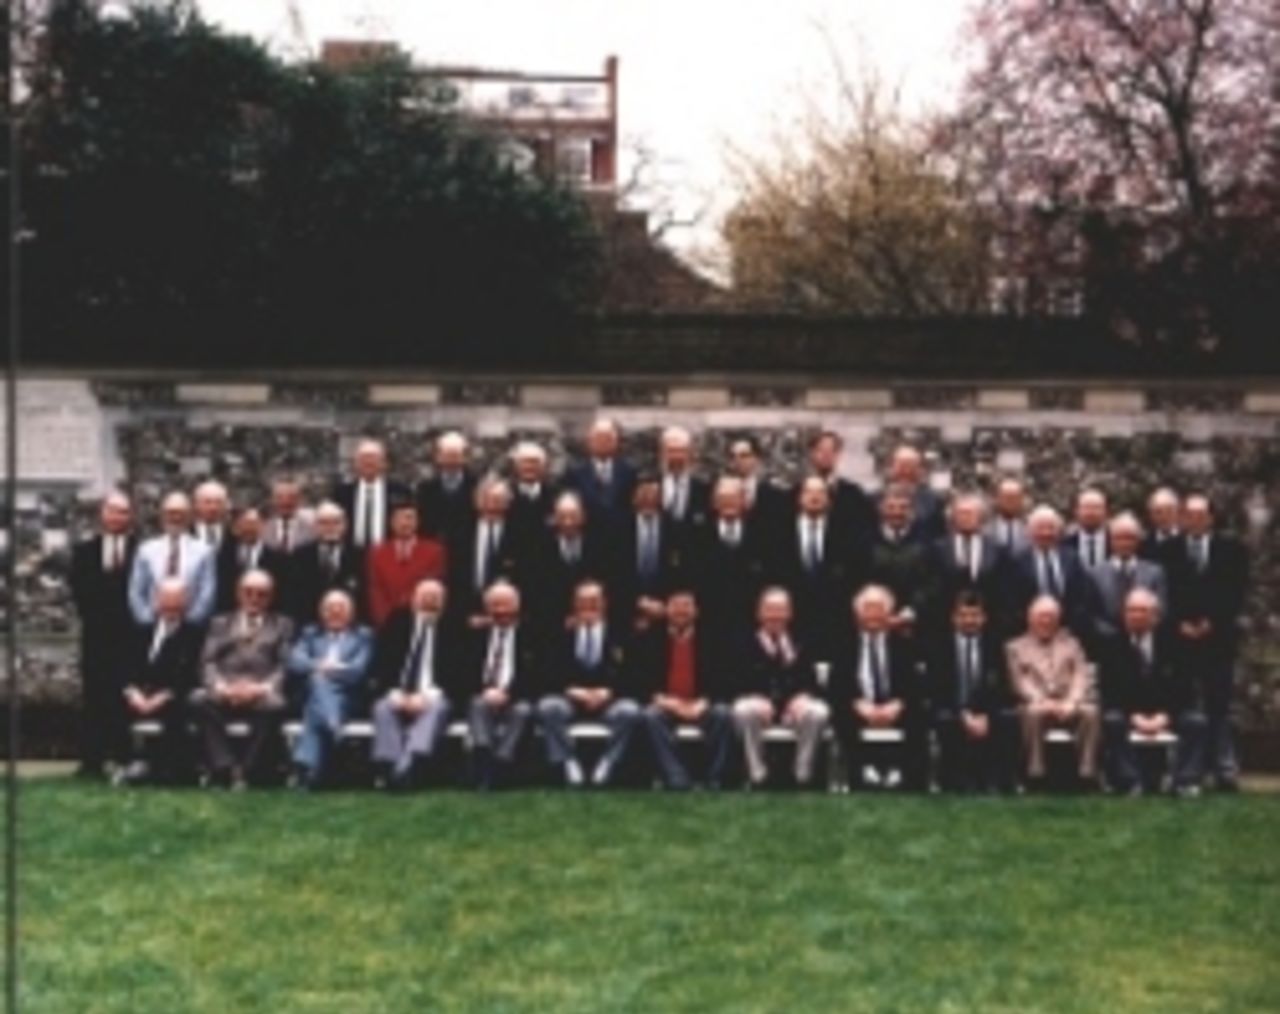 Members of the ACCS meet at Lord's in 1997.